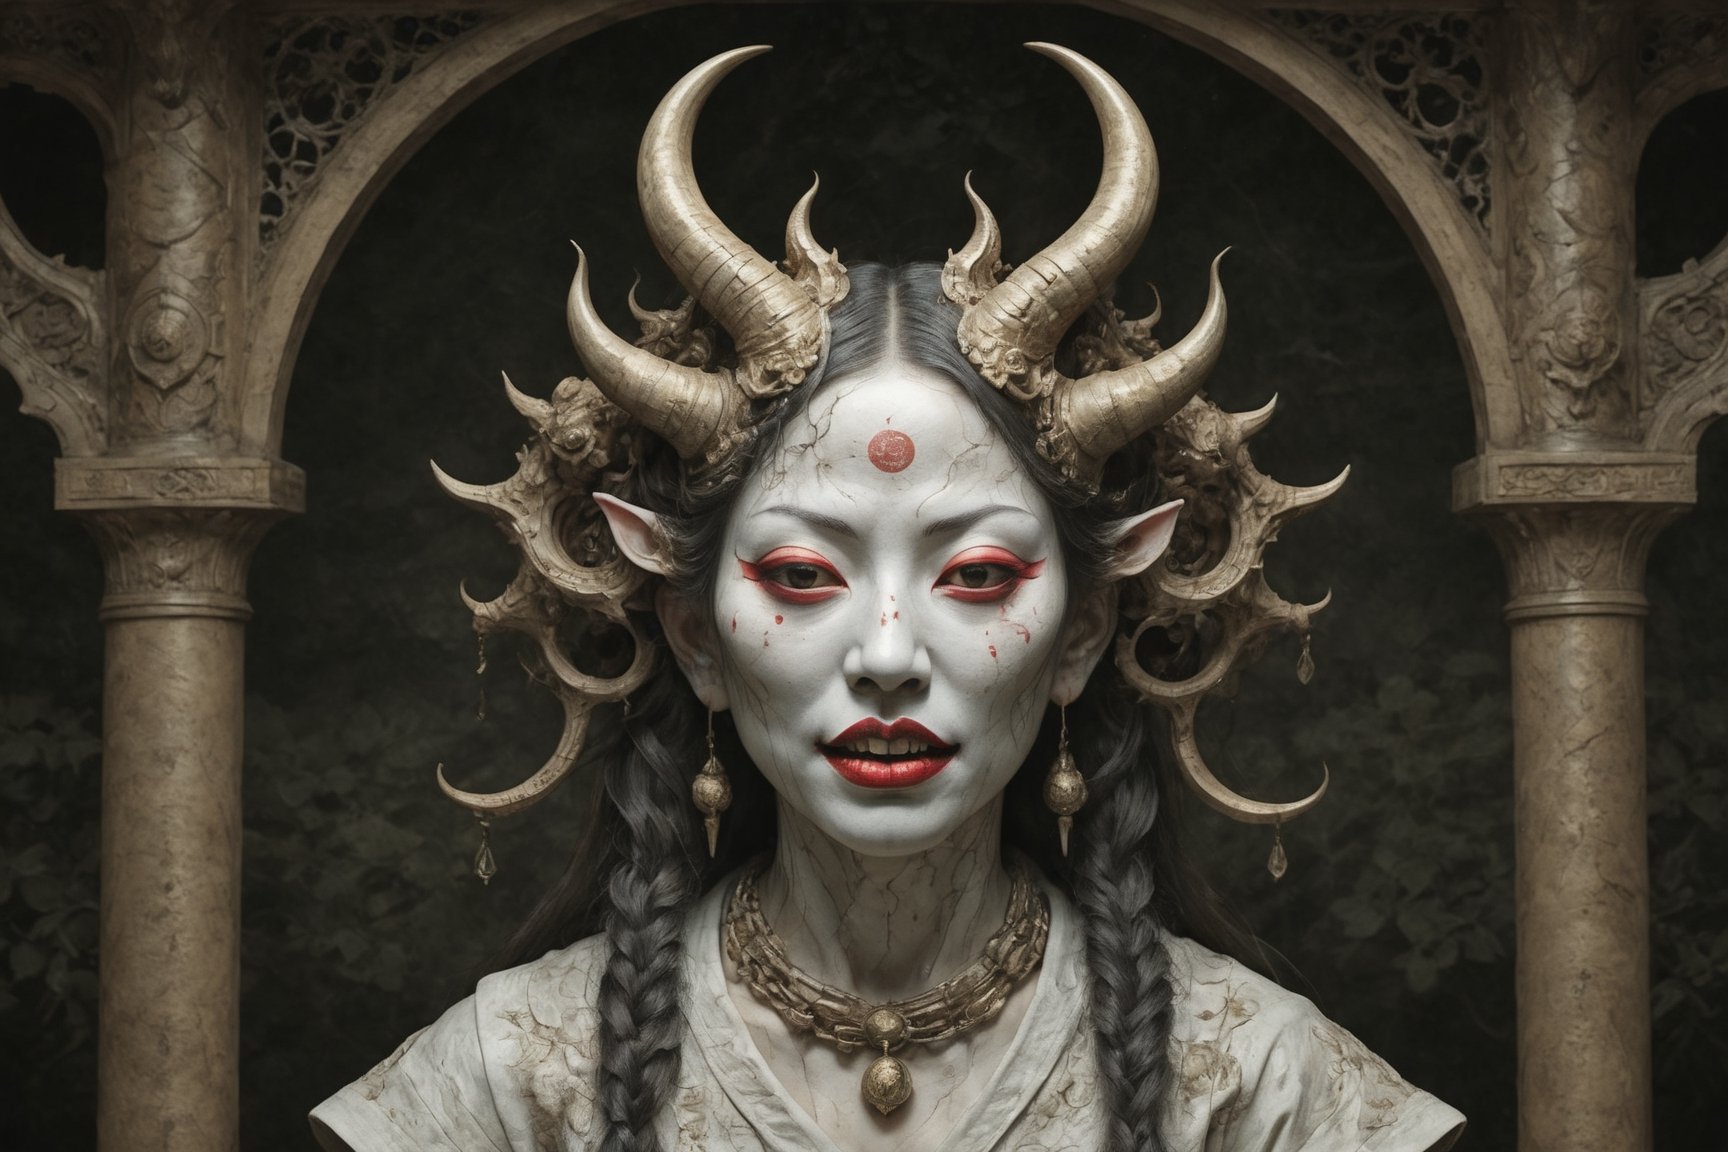 symmetrical portrait of surreal abandoned sculpture of white japanese female stunning Tengu (with a splashing coloration of Alberto Seveso and Basil Gogos), ((Wild crazy long hair)), dream - like heavy mysterious atmosphere,in an abandoned japanese overgrown shrine, perfect composition,beautiful detailed intricate insanely detailed octane,unreal engine 5,8k artistic photography,photo realistic,soft natural volumetric cinematic perfect light,chiaroscuro,award - winning photography, ((tsutomu nihei, Bastien Lecouffe Deharme,  iris van herpen and wangechi Mutu)), art forms of nature by ernst haeckel,  art nouveau,  symbolist,  Kinetic Art,  visionary,  gothic,  (((ancient japanese mythical being, Tengu with horns and shapr demon teeth:1.4))),  neo - gothic,  pre - raphaelite,  fractal lace, intricate mythical botanical,  ai biodiversity,  surrealism,  hyper detailed ultra sharp octane render,  (Audrey Kawasaki,  Anna Dittmann:1.4),  known for their captivating and atmospheric pieces. The overall effect of the image is ethereal,  as if the woman is enveloped in glowing stardust created expertly by artist W. Zelmer. The image is of exceptional quality,  showcasing the fine details and masterful blending of colors, folklore, ,on parchment